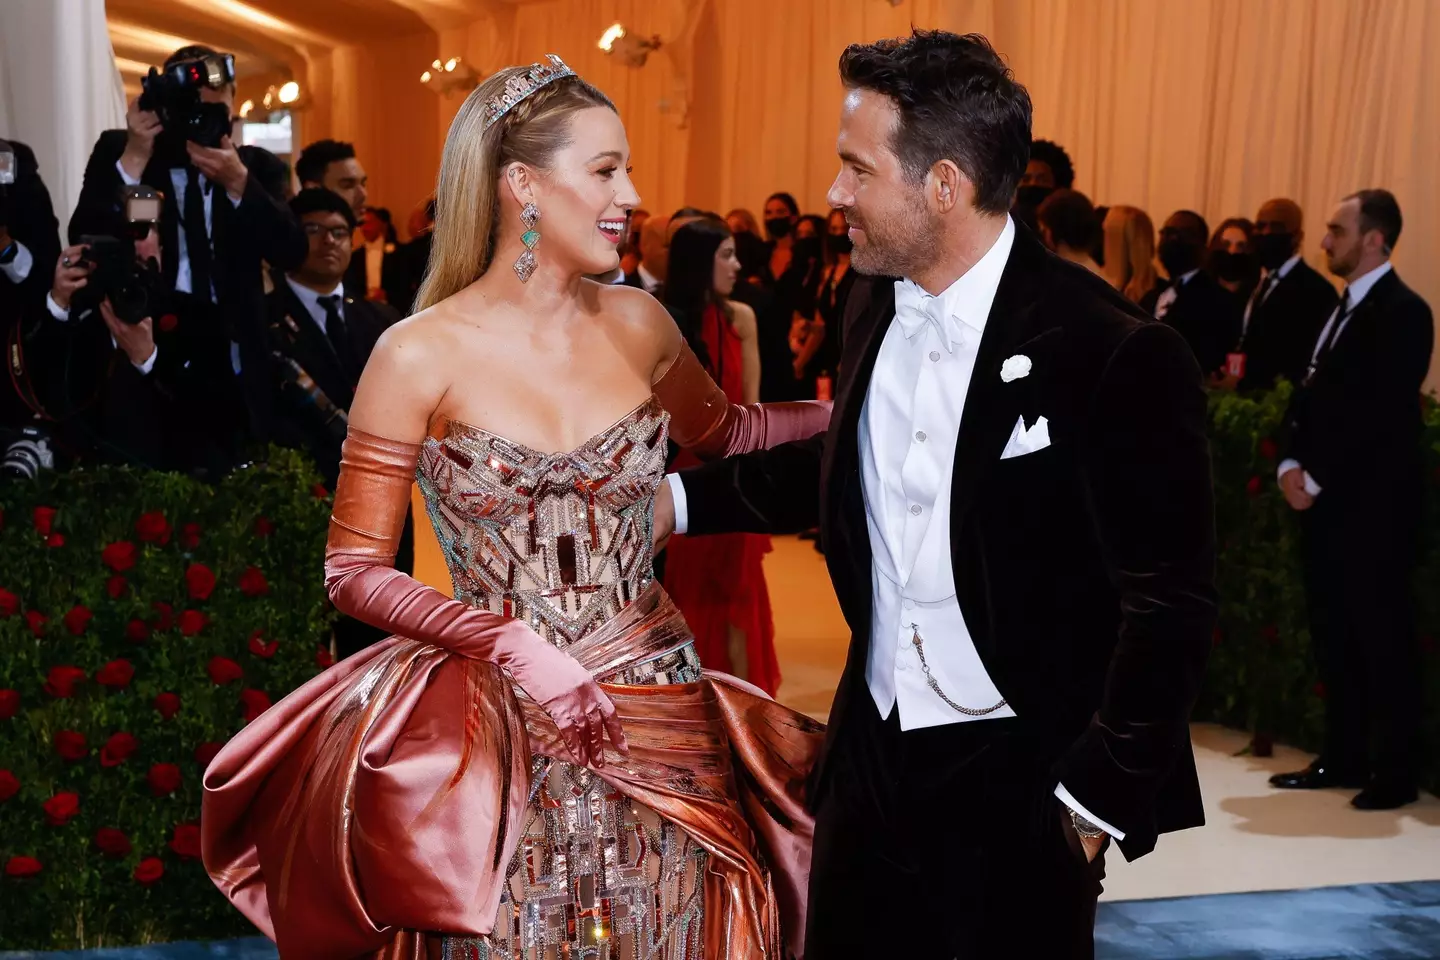 Celebs who show up to the Met Gala have to follow strict rules.